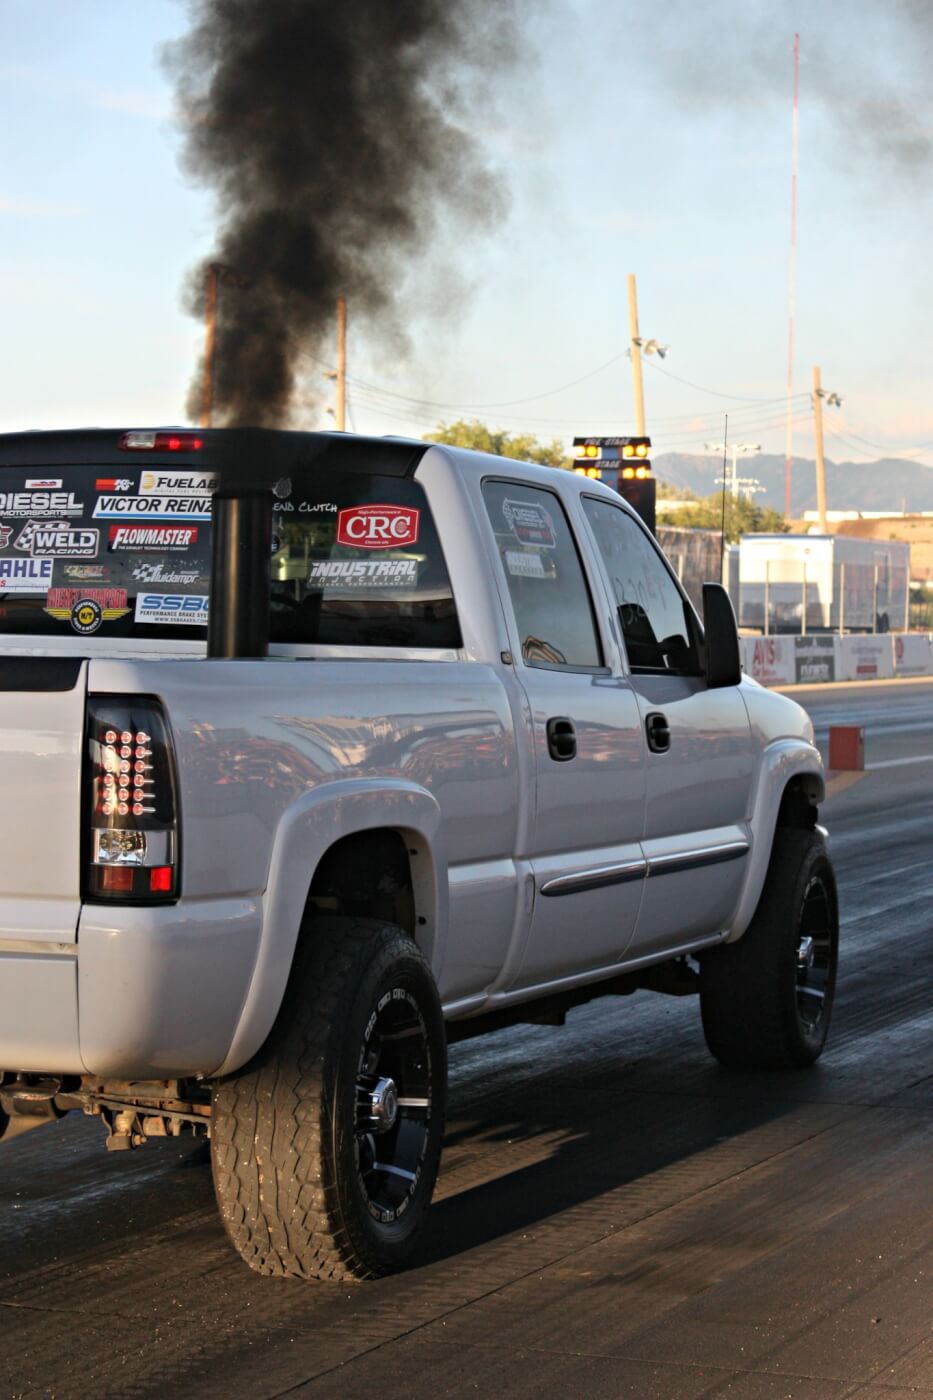 Is there anything better than a little diesel drag racing on a Friday night? We don’t think so either.